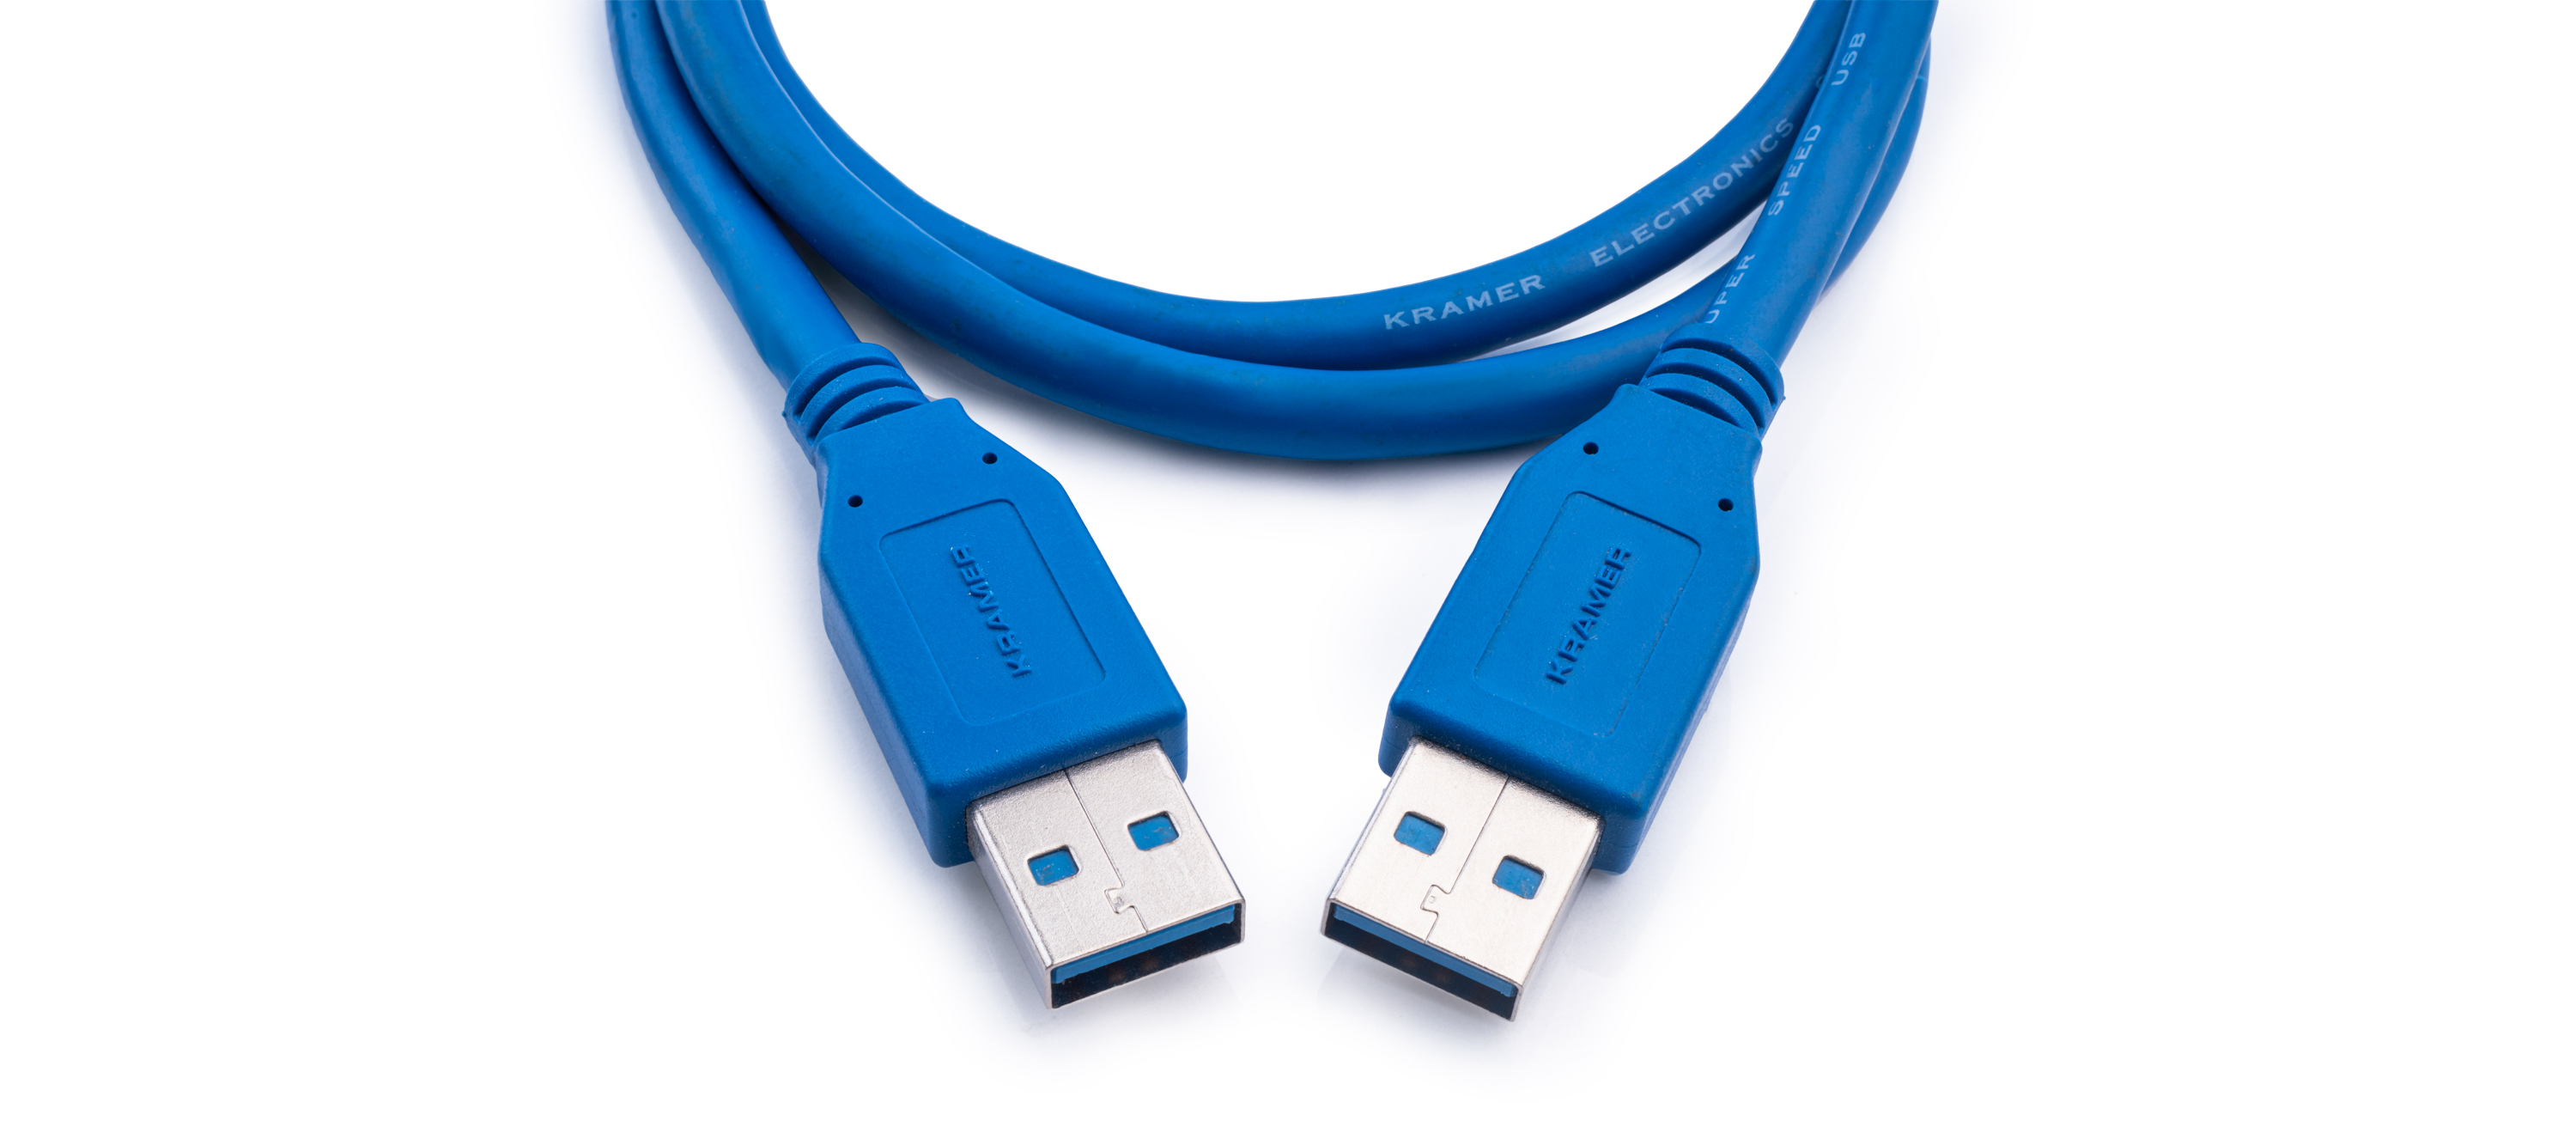 C-USB3/AA-3 USB 3.0 A (M) to A (M) Cable 3'